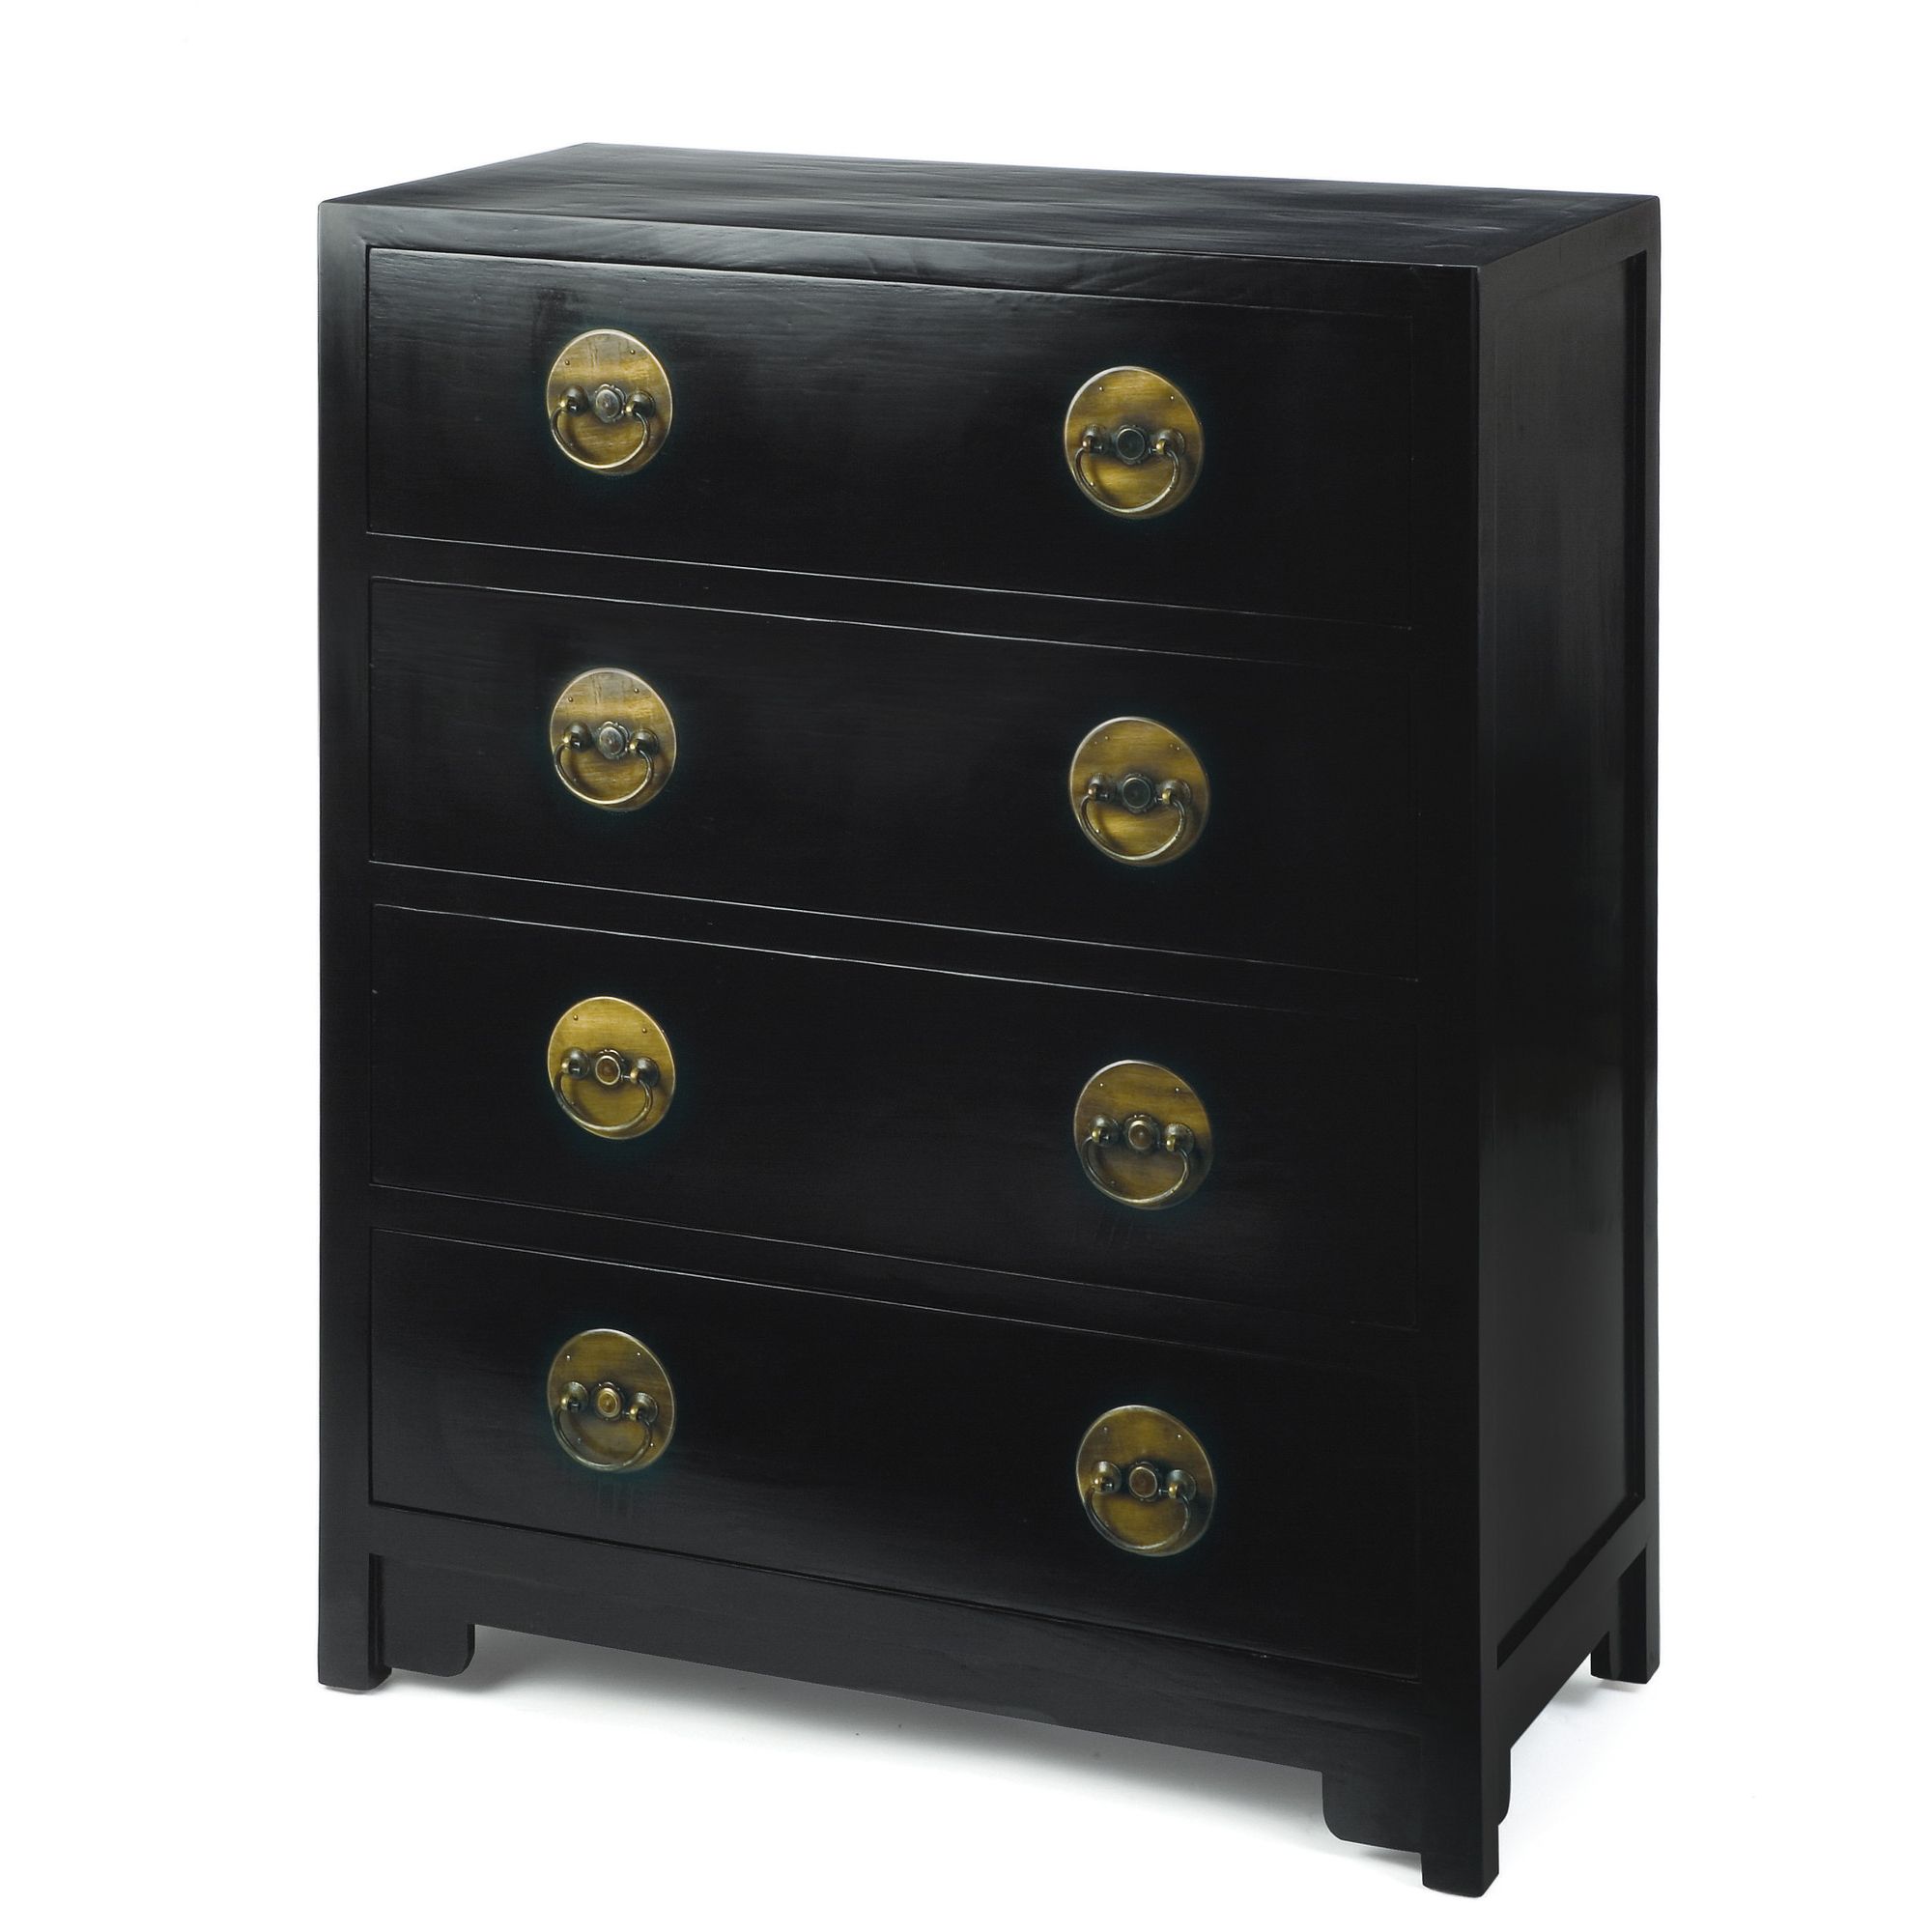 Shimu Chinese Classical Ming Chest of Drawers - Black Lacquer at Tesco Direct